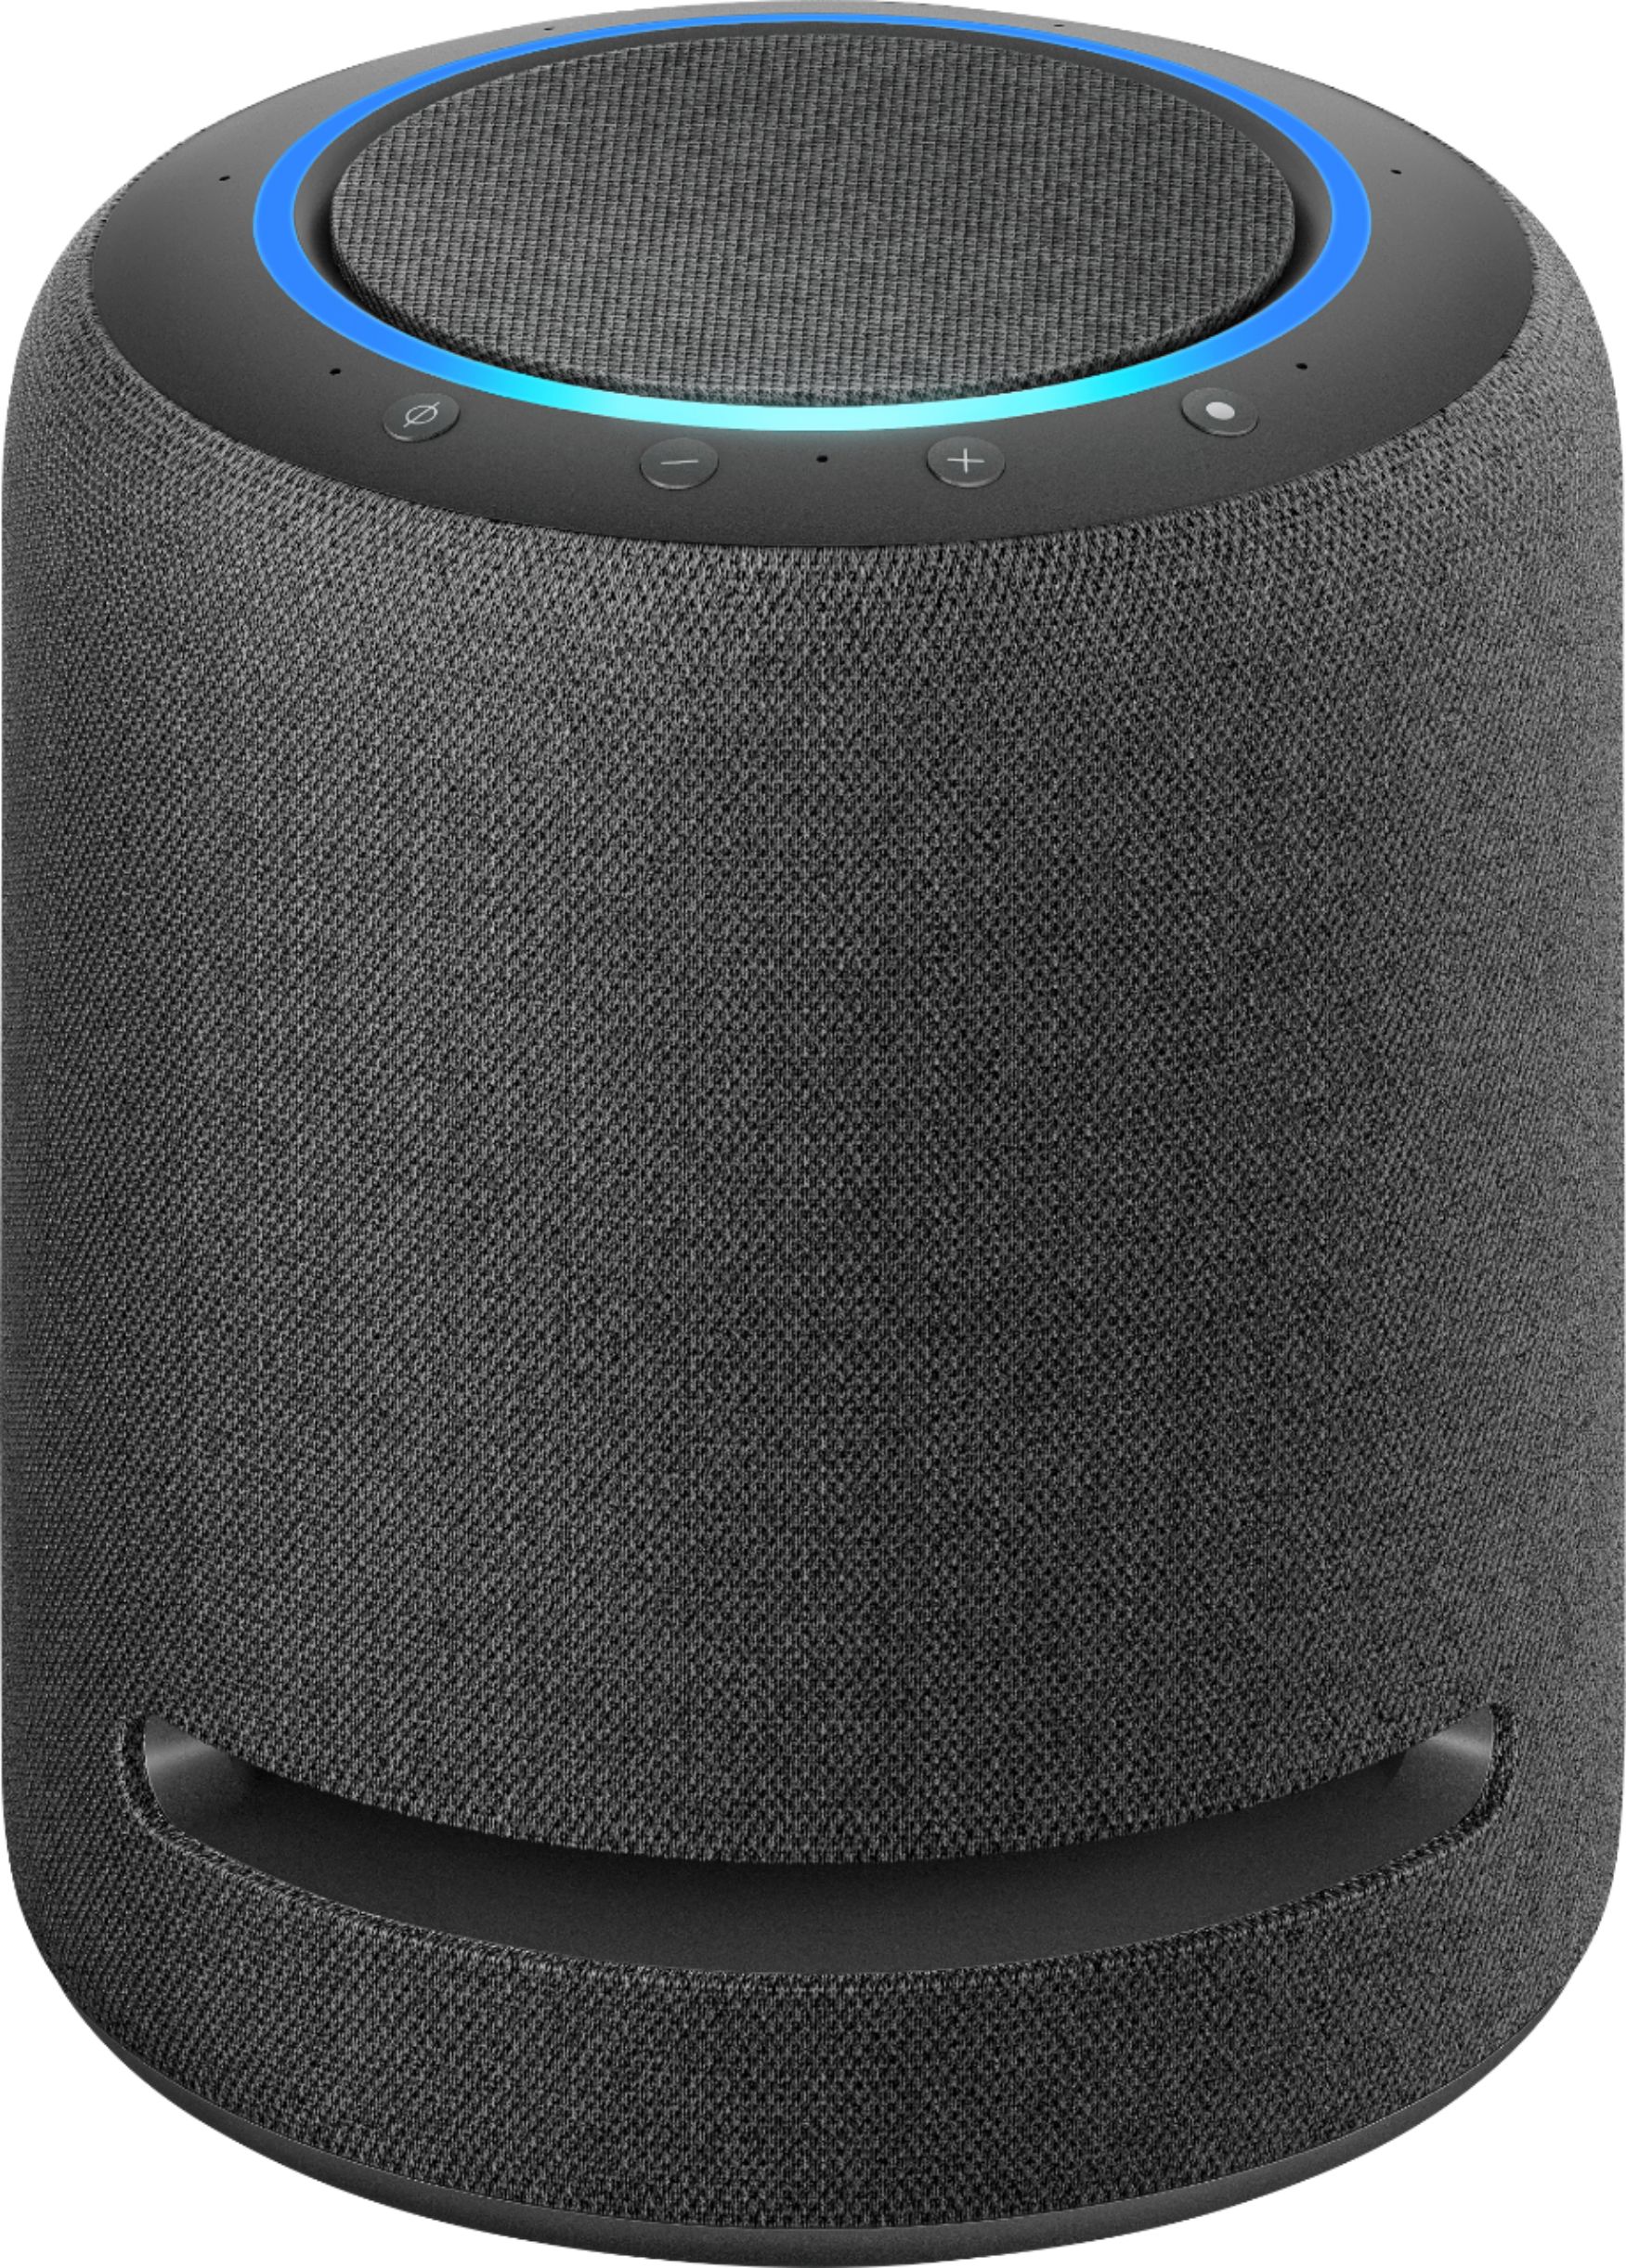 Amazon Echo Studio Hi-Res 330W Smart Speaker with Dolby Atmos and 